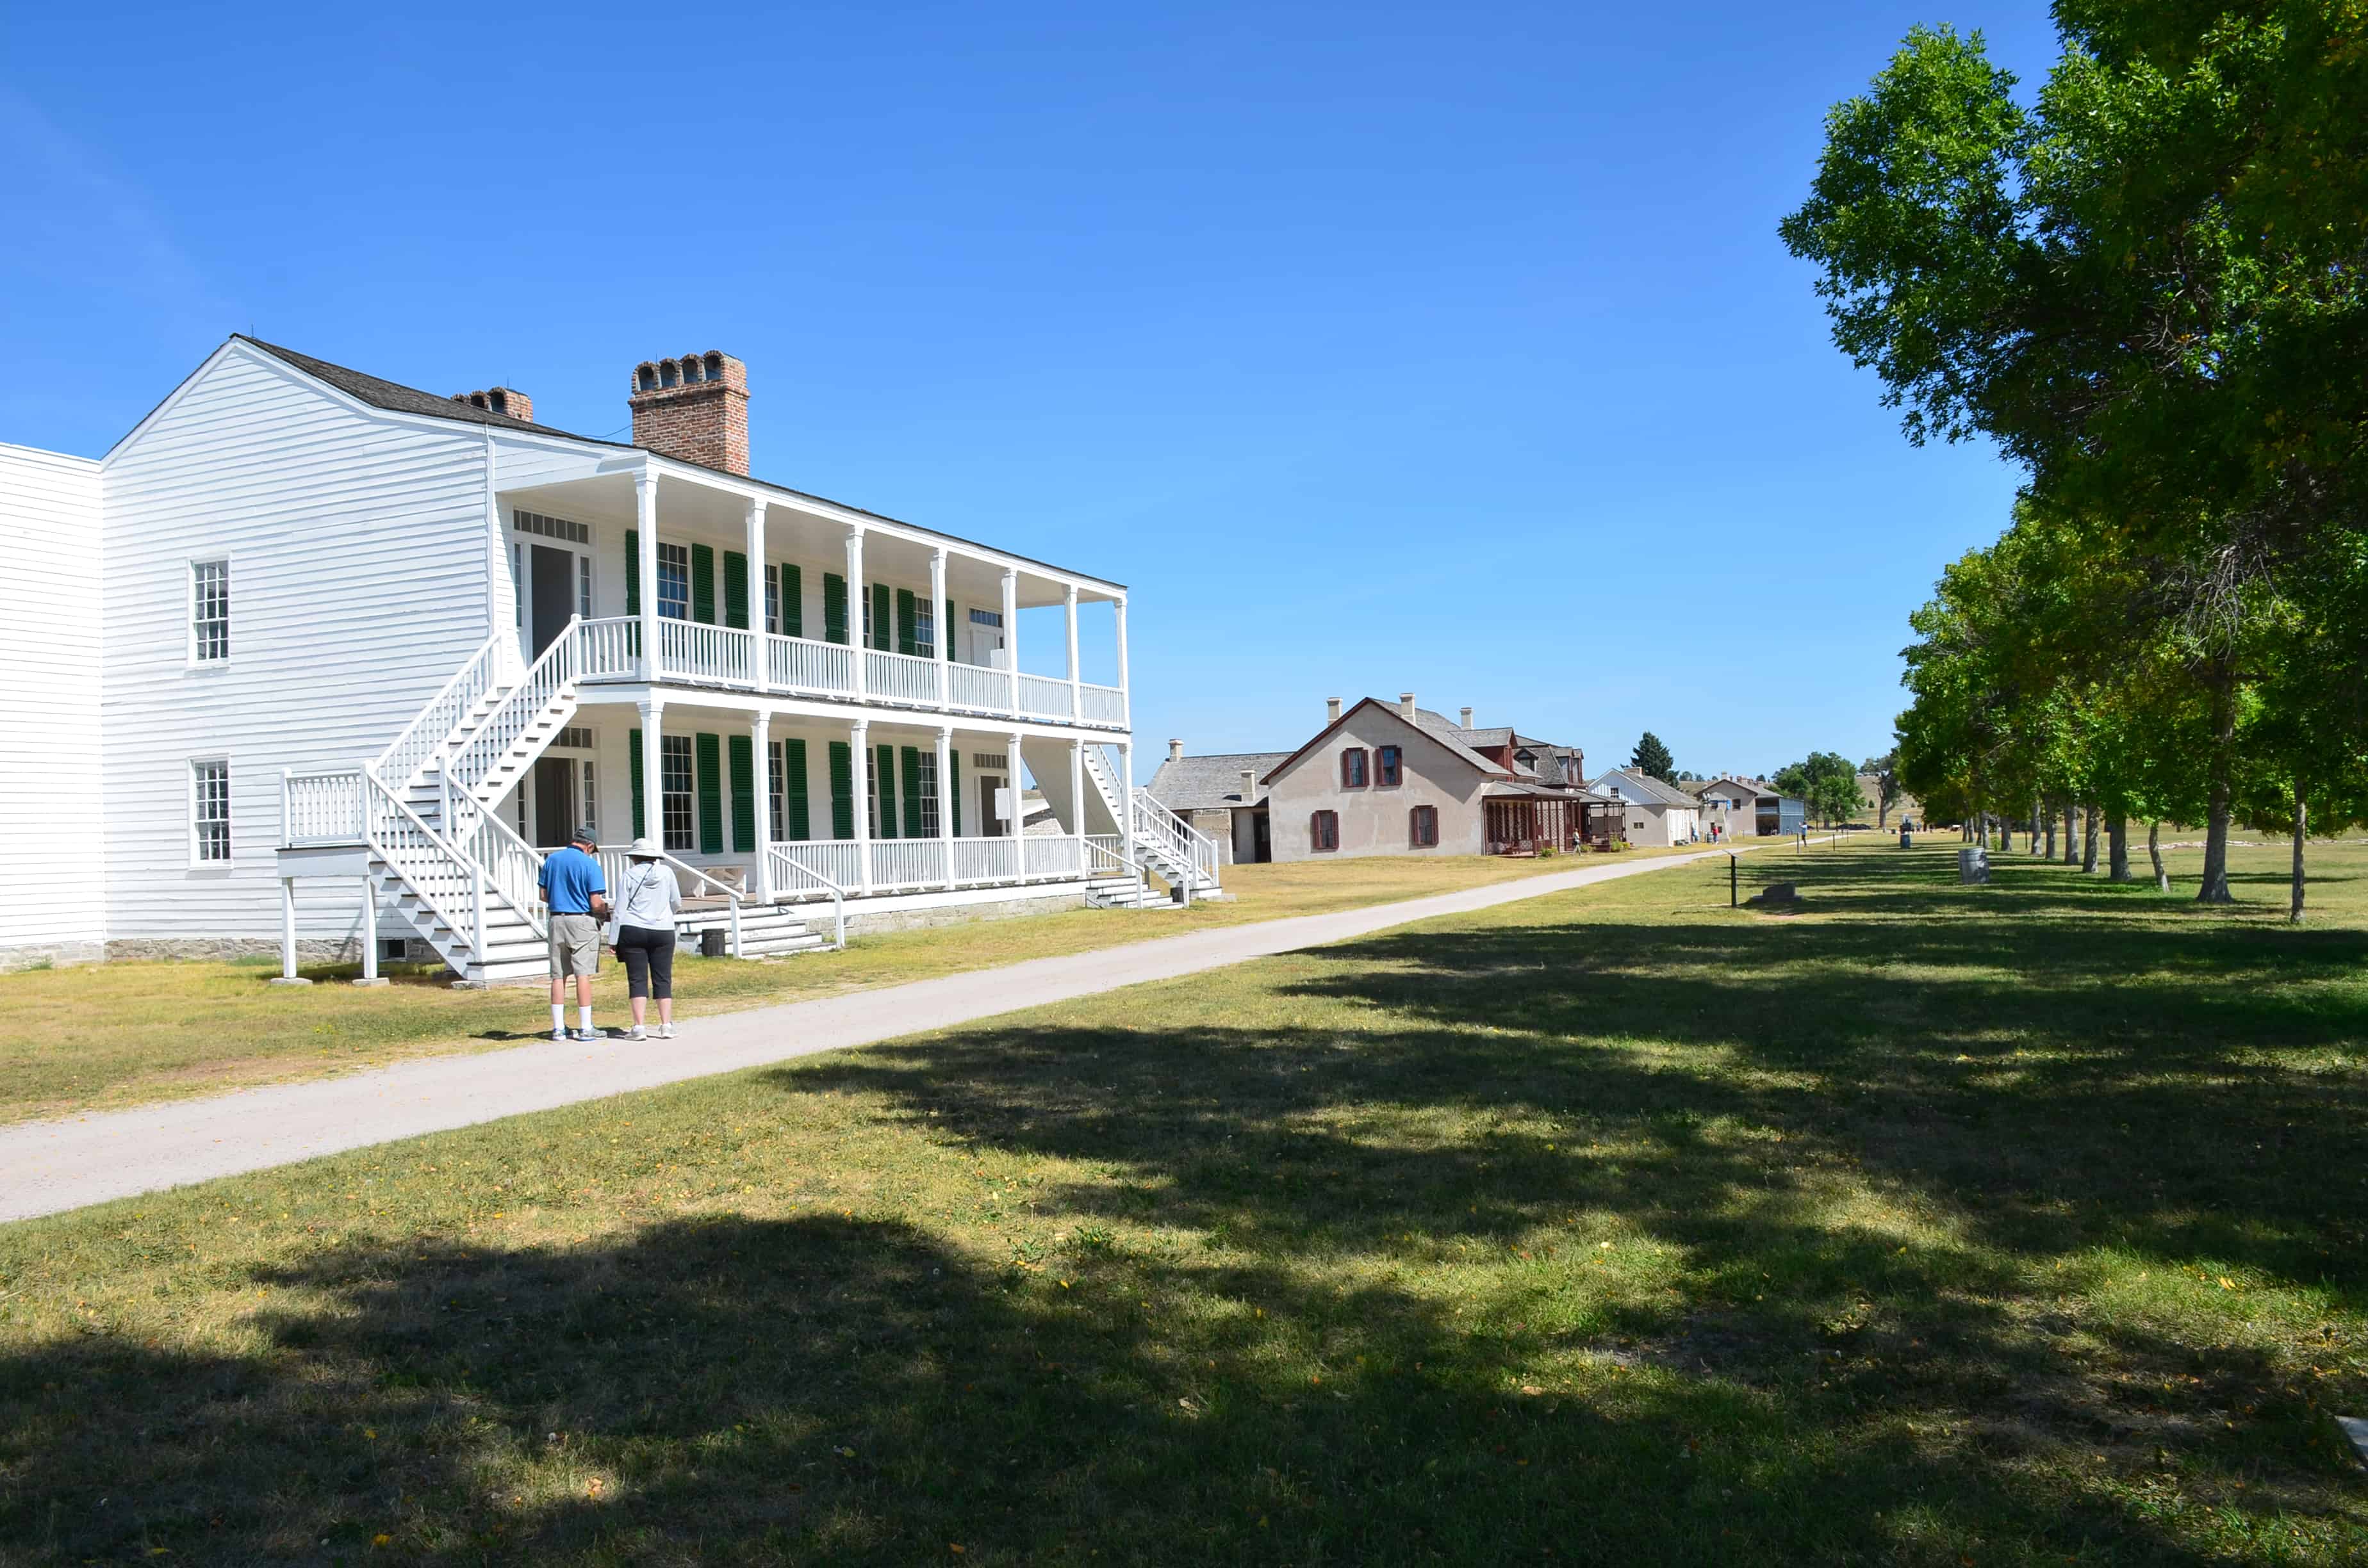 Old Bedlam and Officers' Row at Fort Laramie National Historic Site in Wyoming